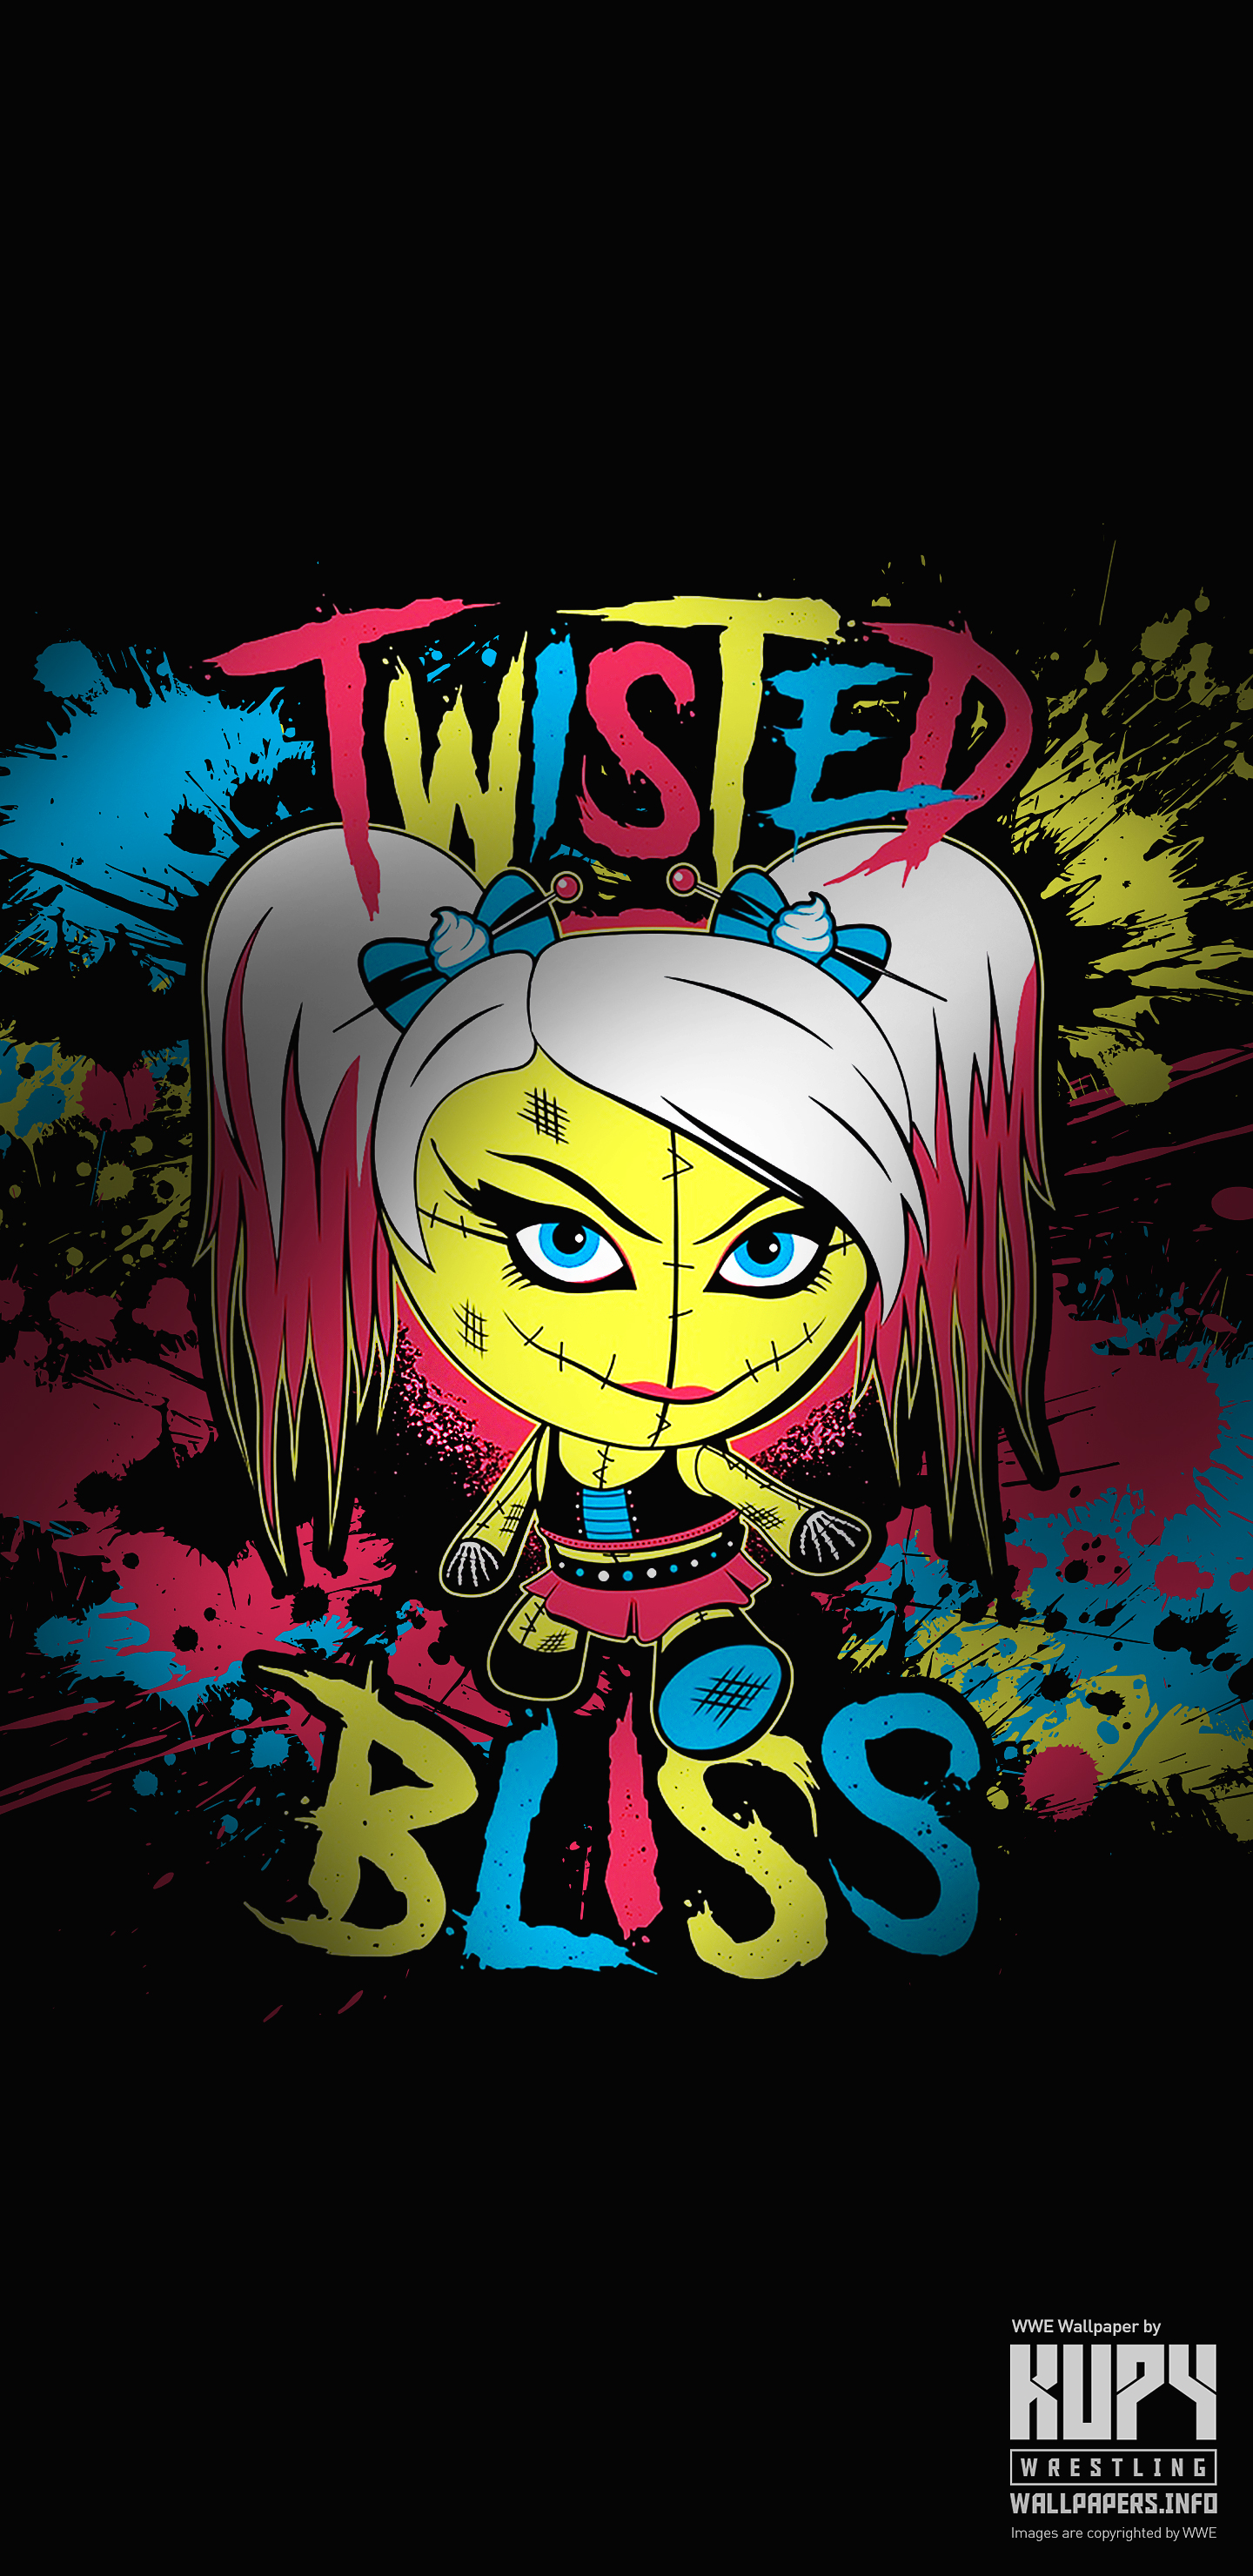 Mobile-only) NEW Twisted Bliss iPhone / Android wallpaper! - Kupy Wrestling  Wallpapers